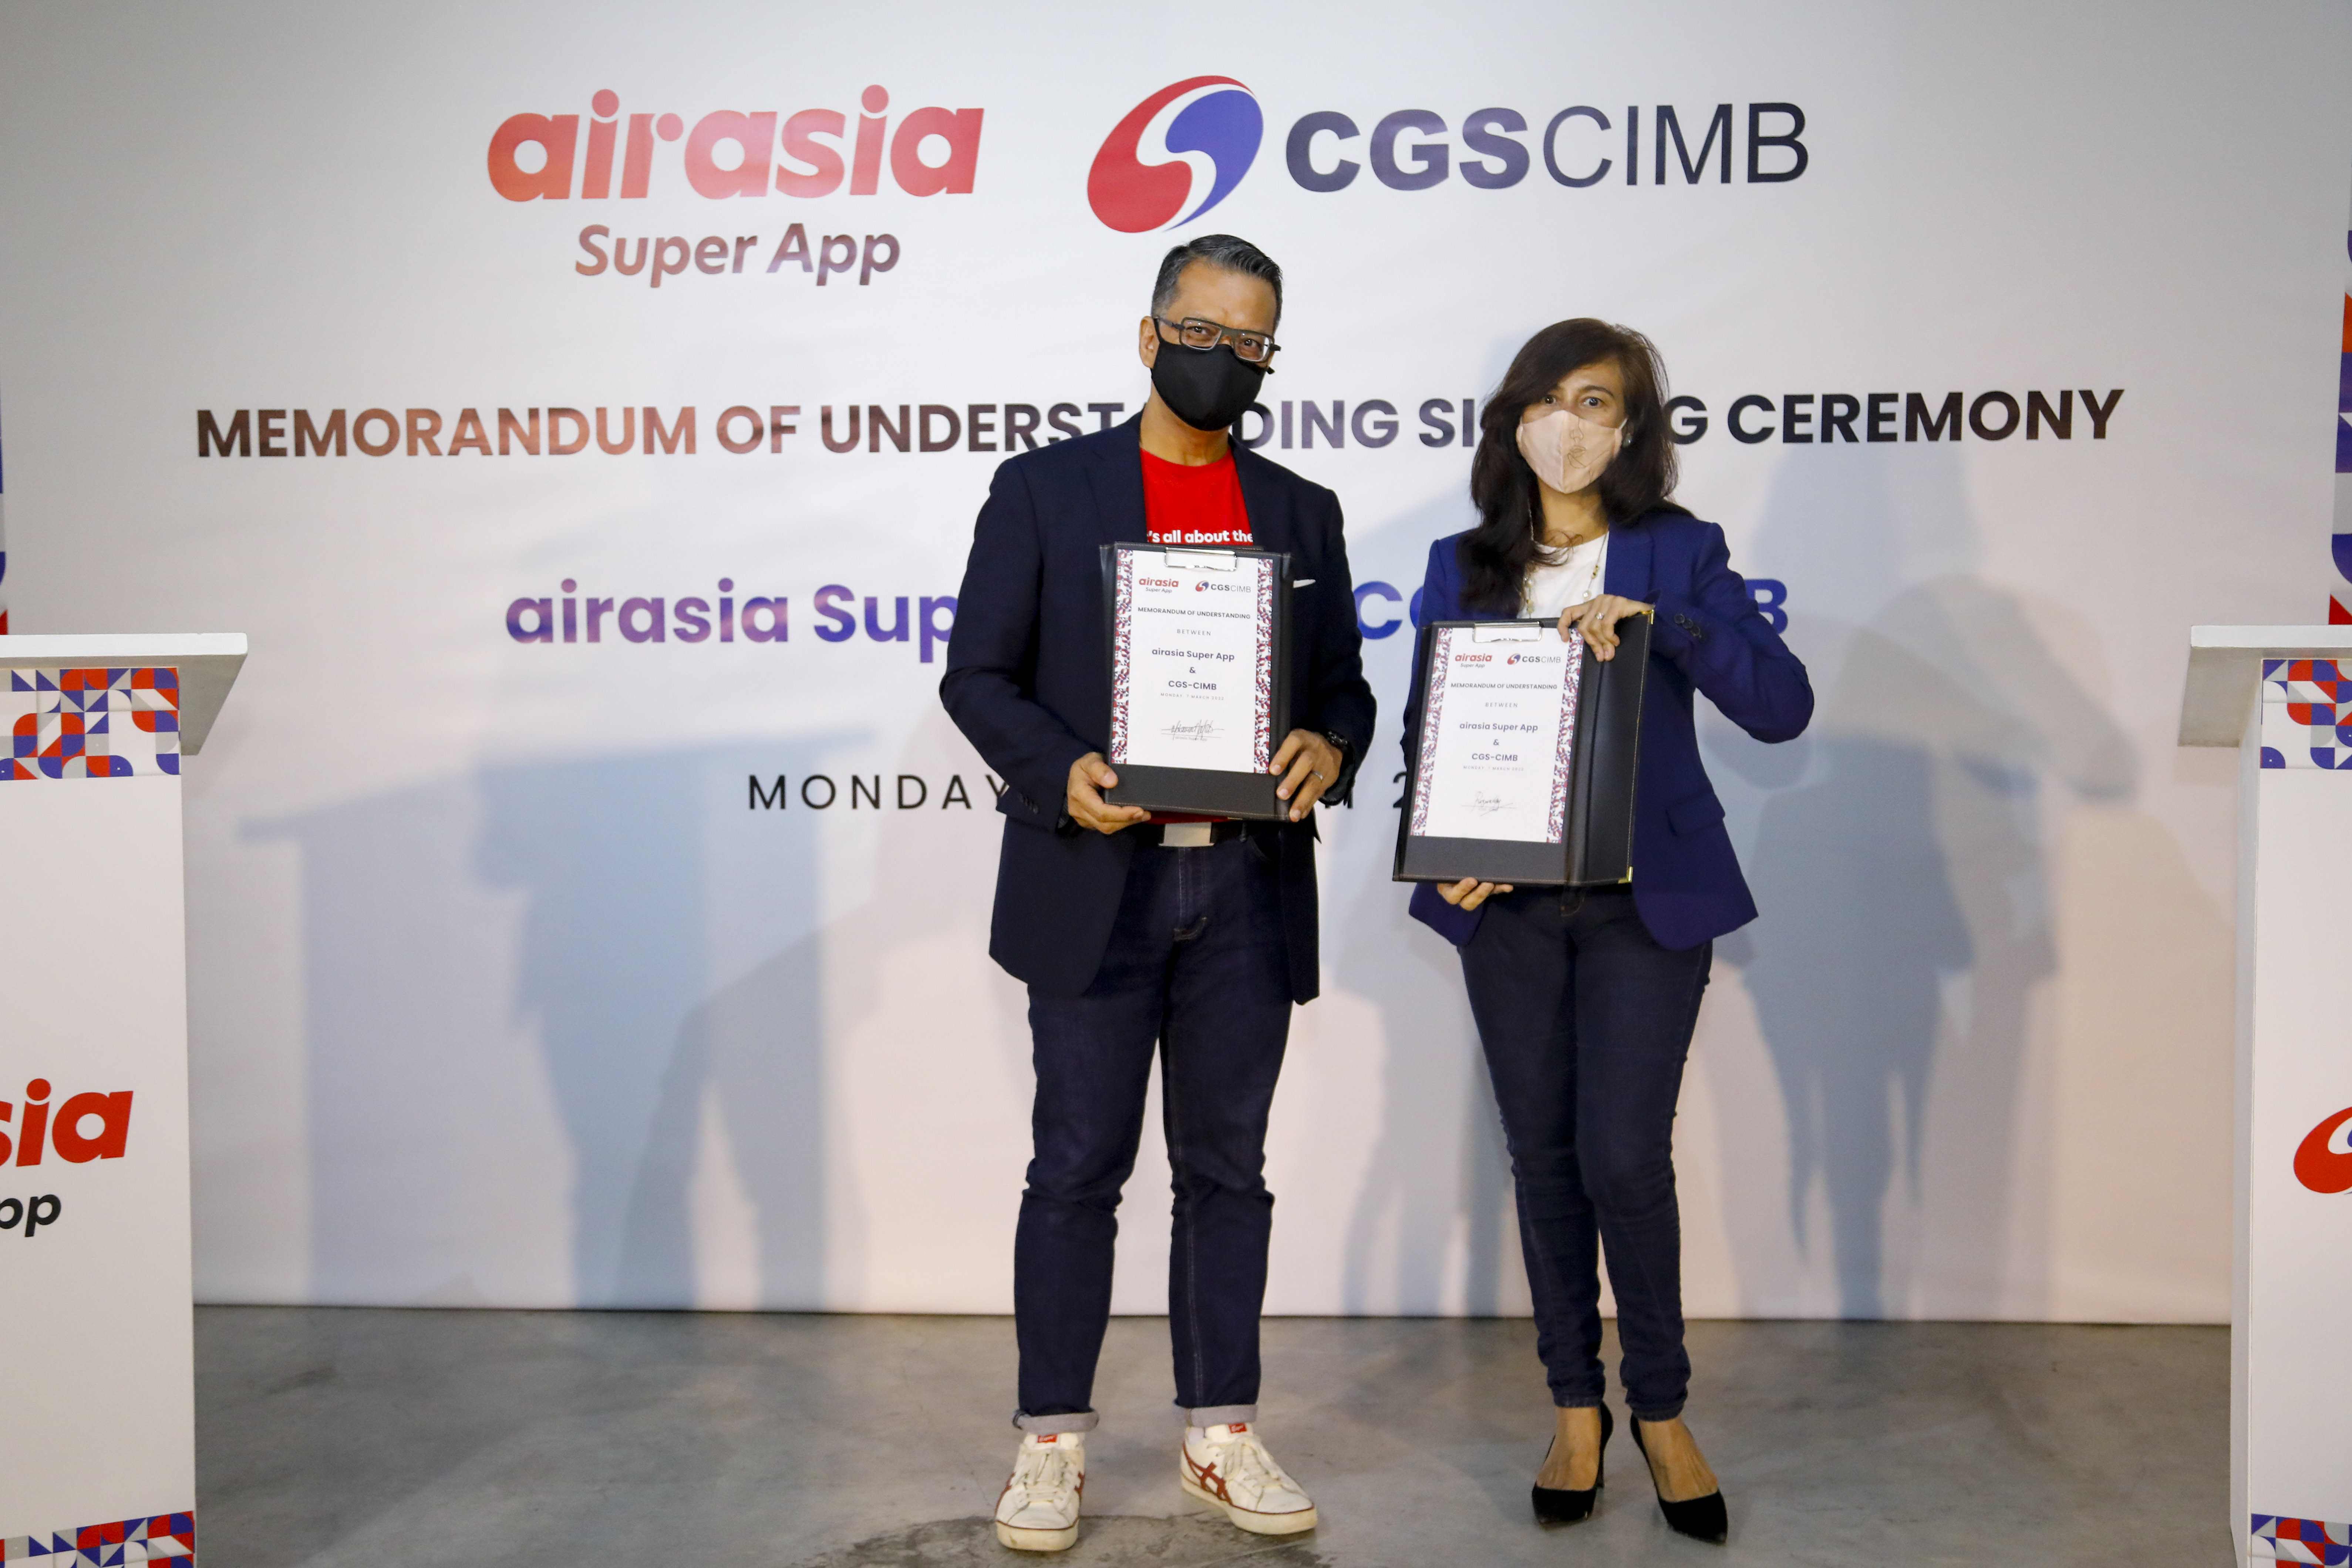 CGS-CIMB Securities, airasia Super App tie up to make investment accessible  